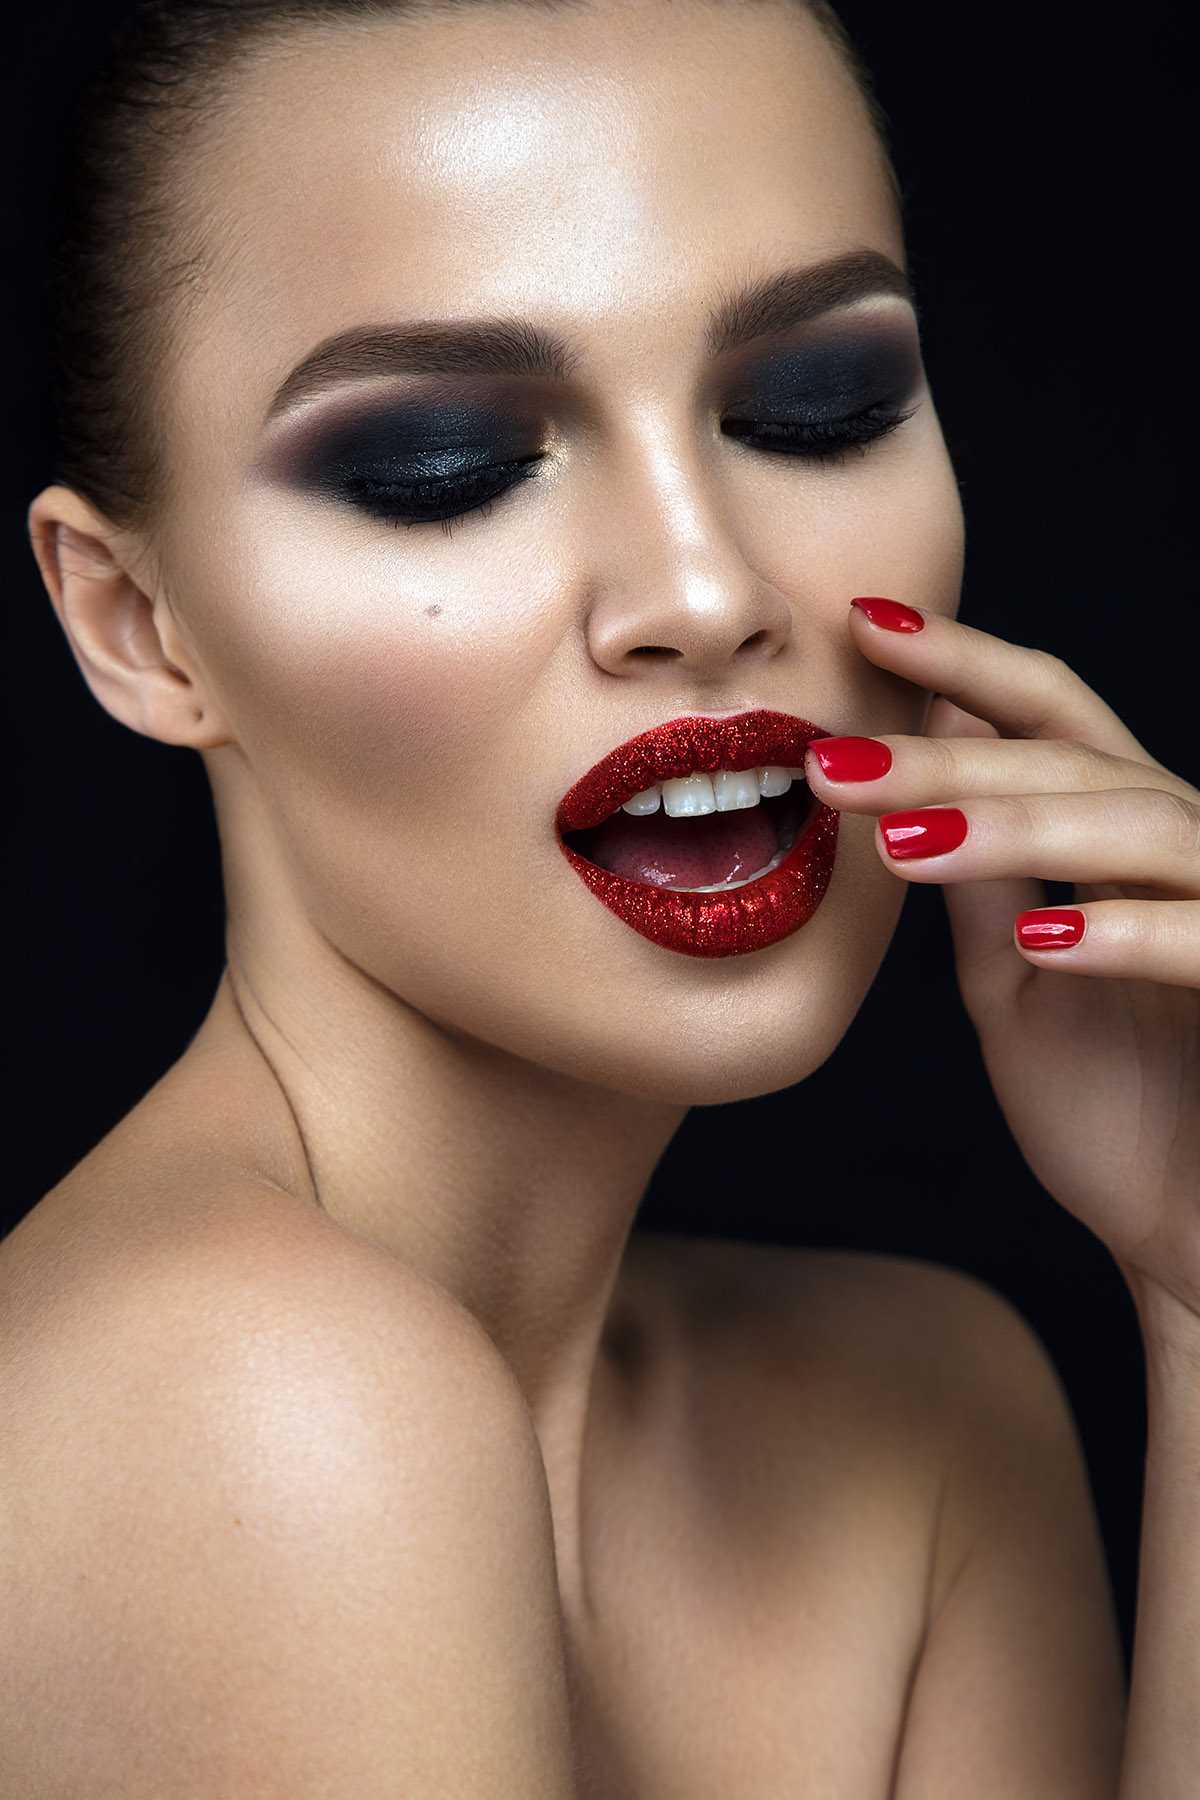 Fashion woman portrait on black background with red shiny lips.